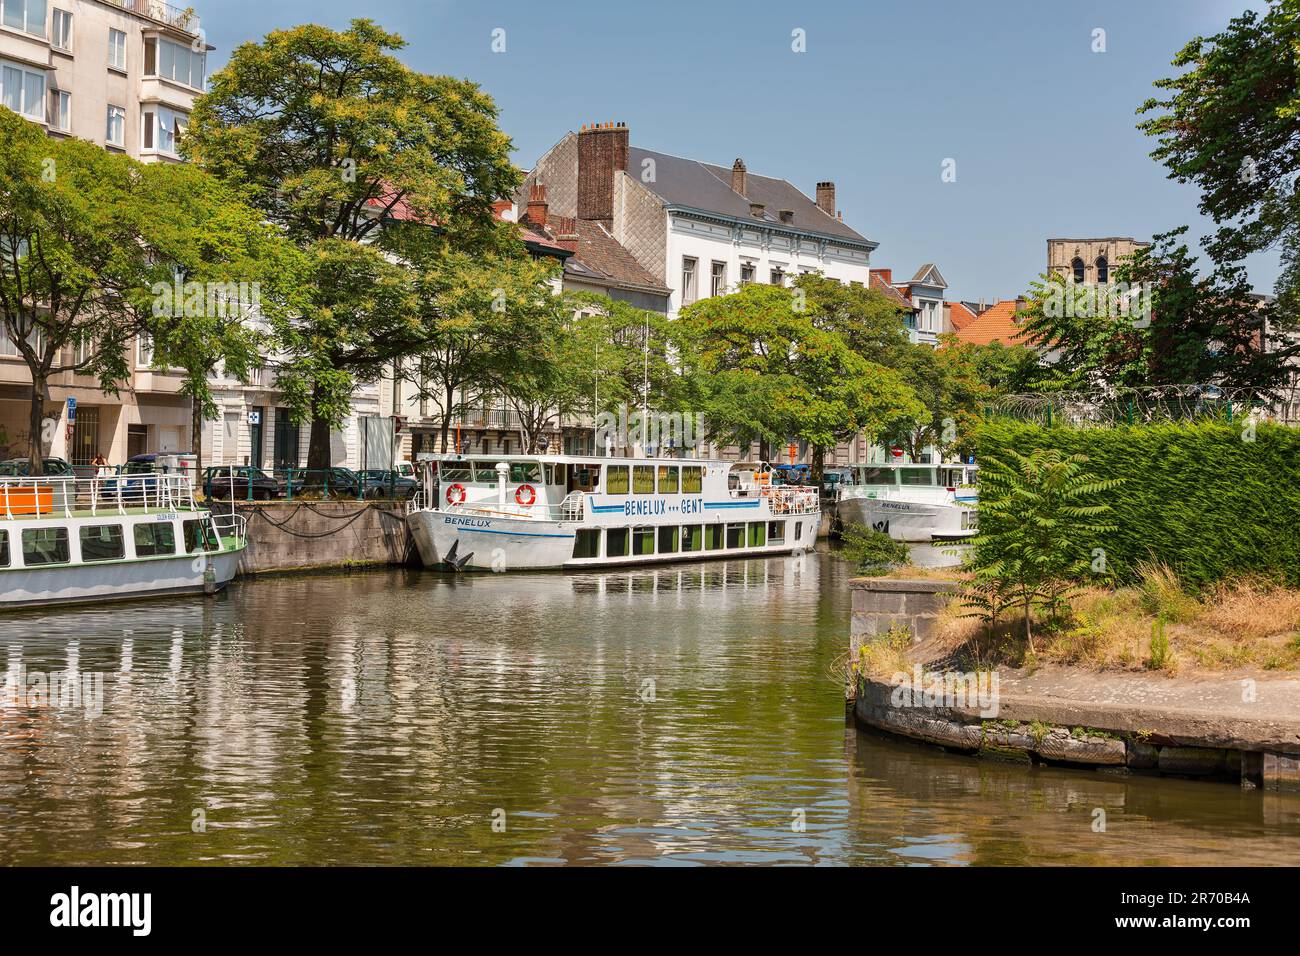 Ghent, Belgium - July 10, 2010 : Ketelpoort, boat hire and boat tour depot at intersection of two canals. Stock Photo